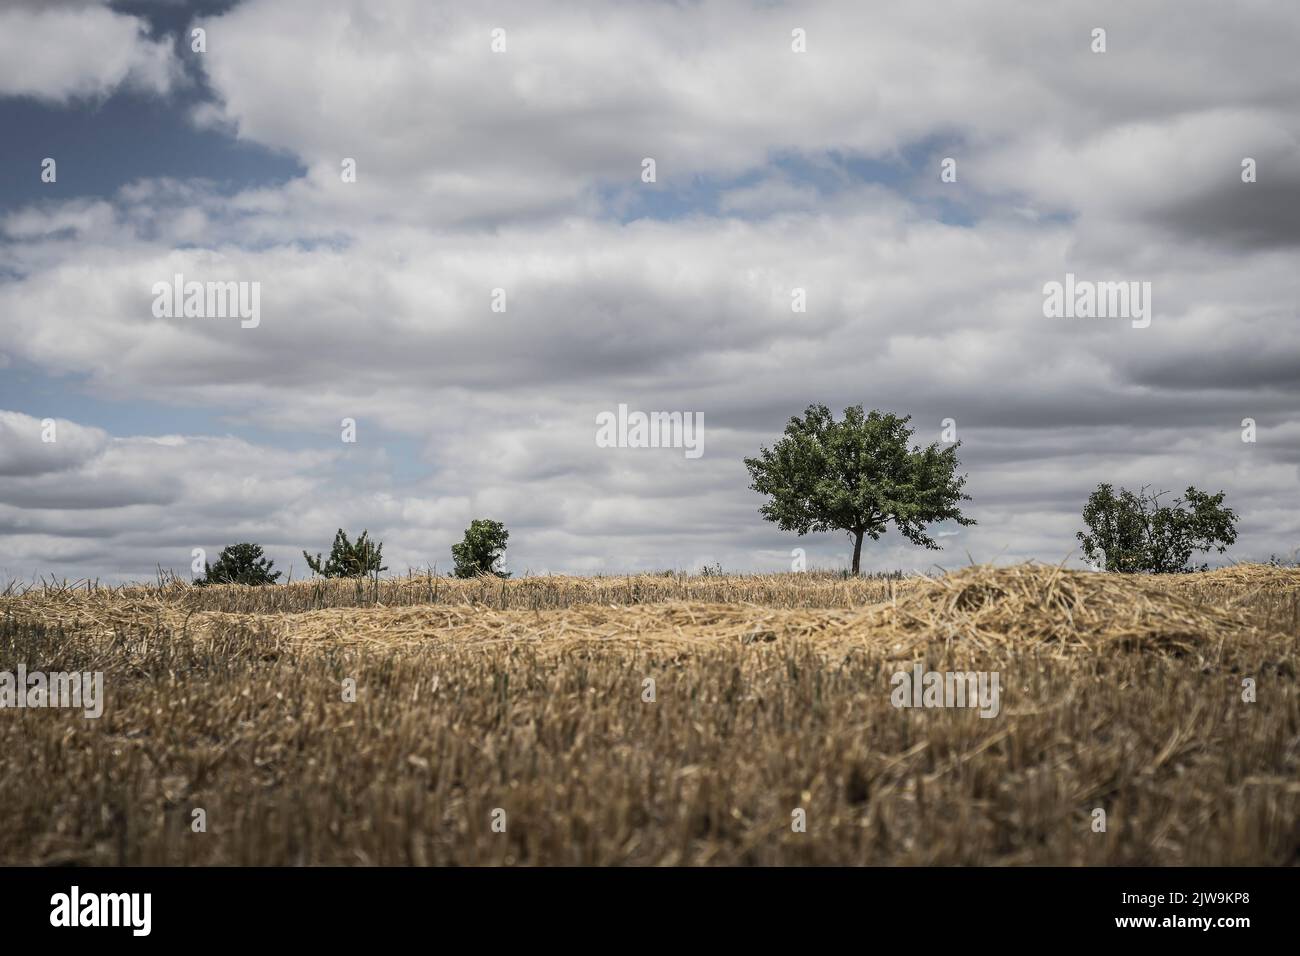 freshly harvested corn field with trees on the horizon Stock Photo